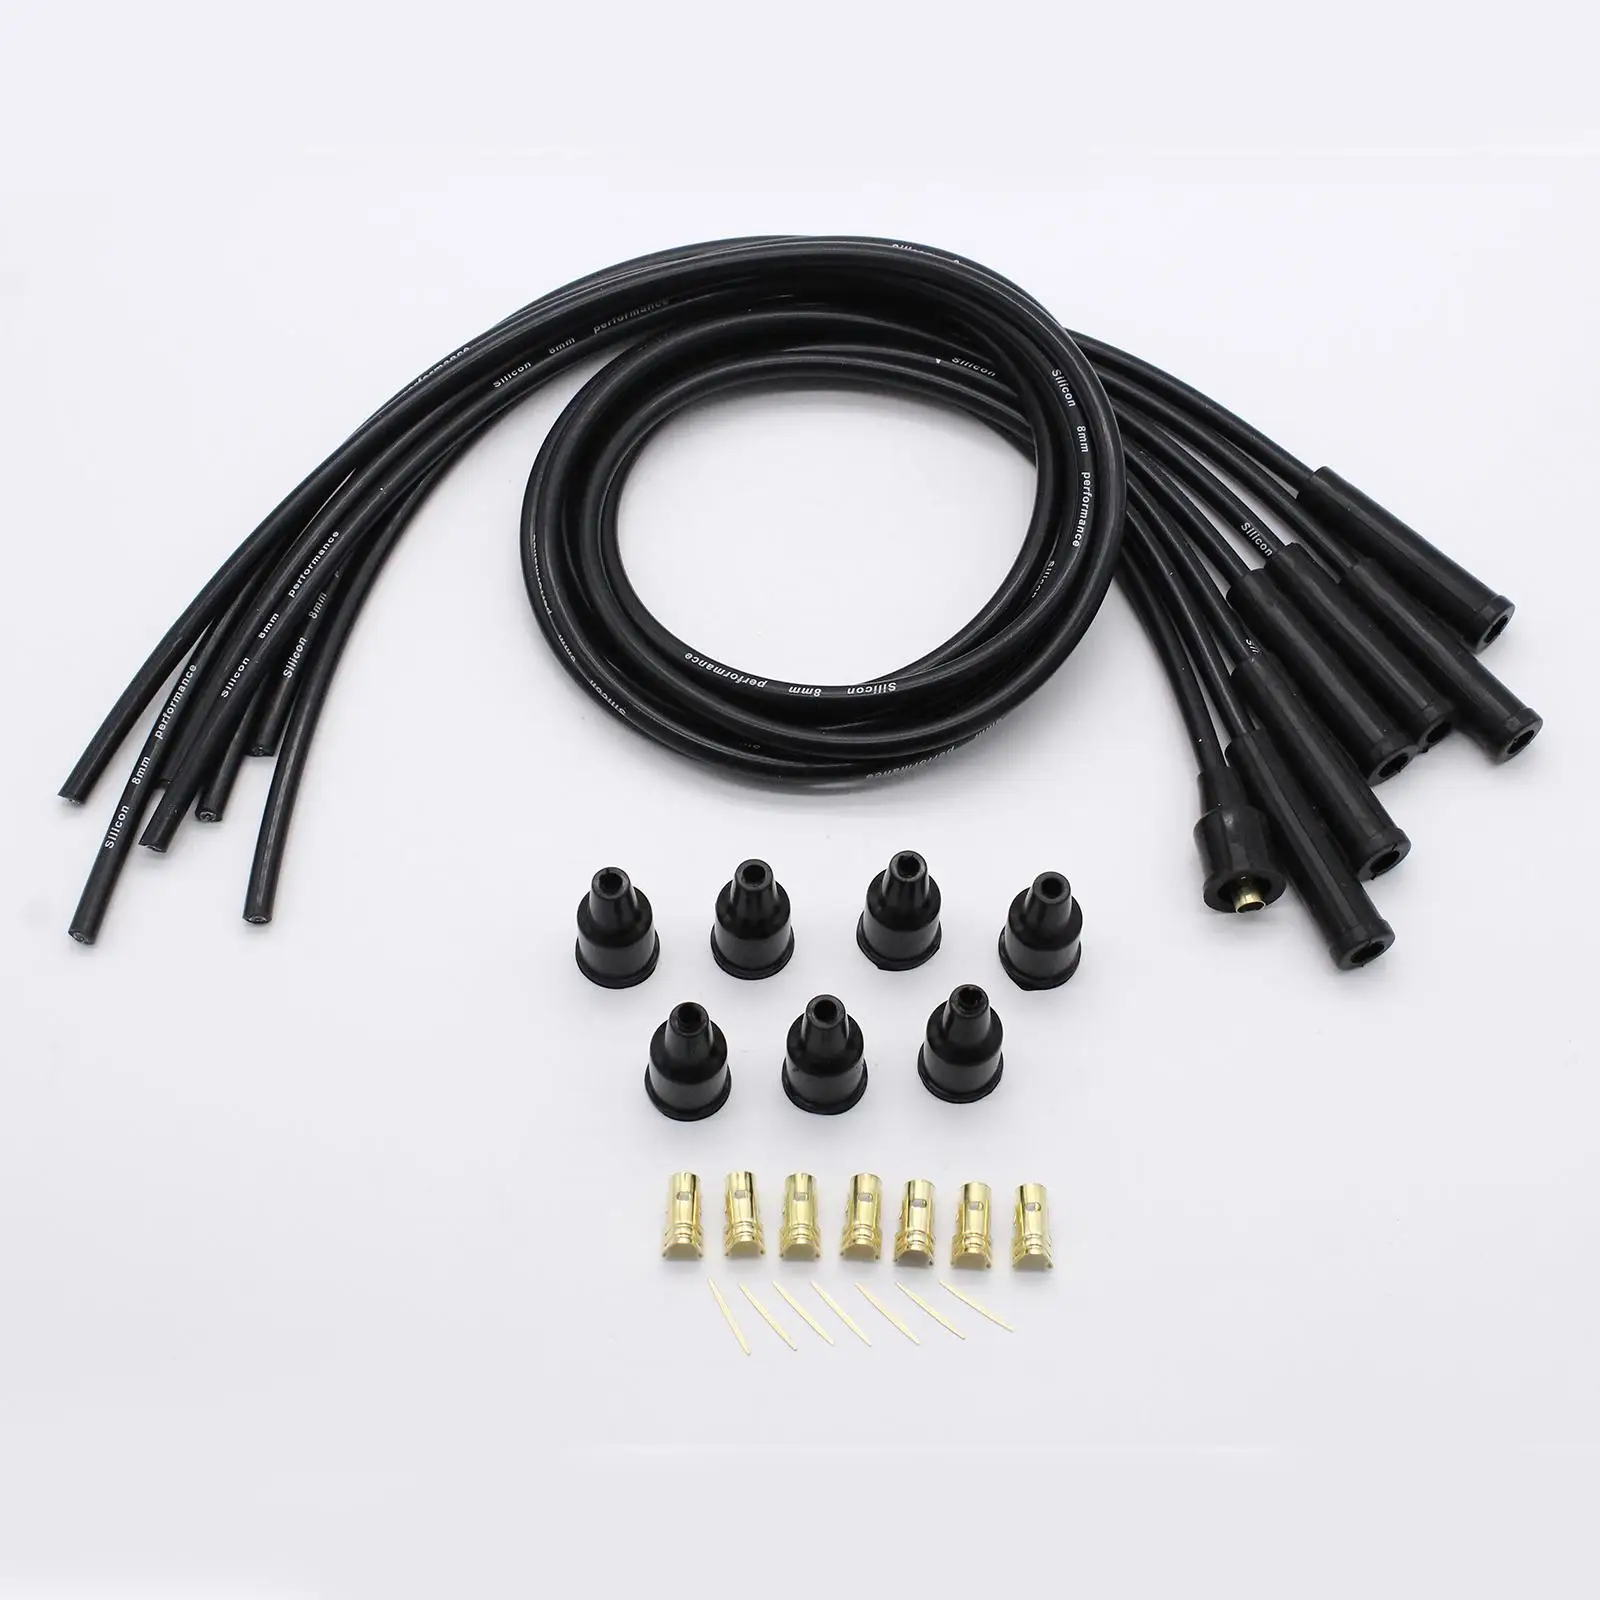 8mm Black Silicone HT Ignition Wires Car Accessories Spare Parts Spark Plug Cables Universal for 6 Cylinder Classic Cars